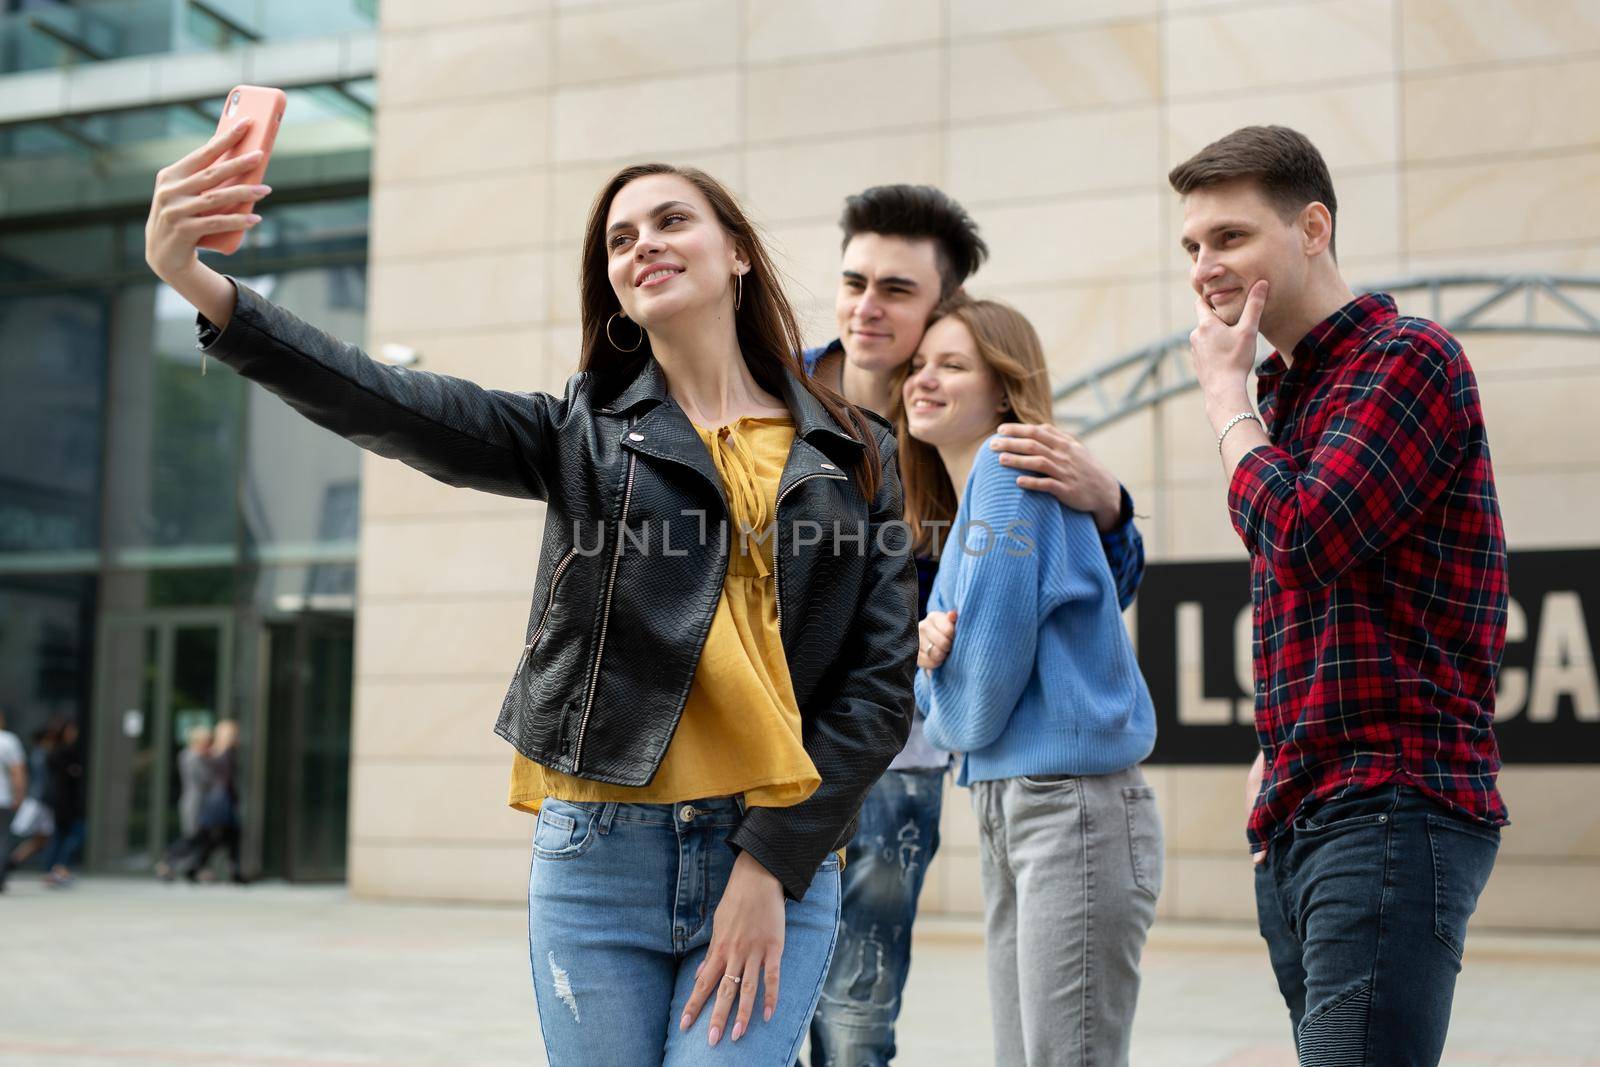 Group of friends taking picture of themselves with smartphone